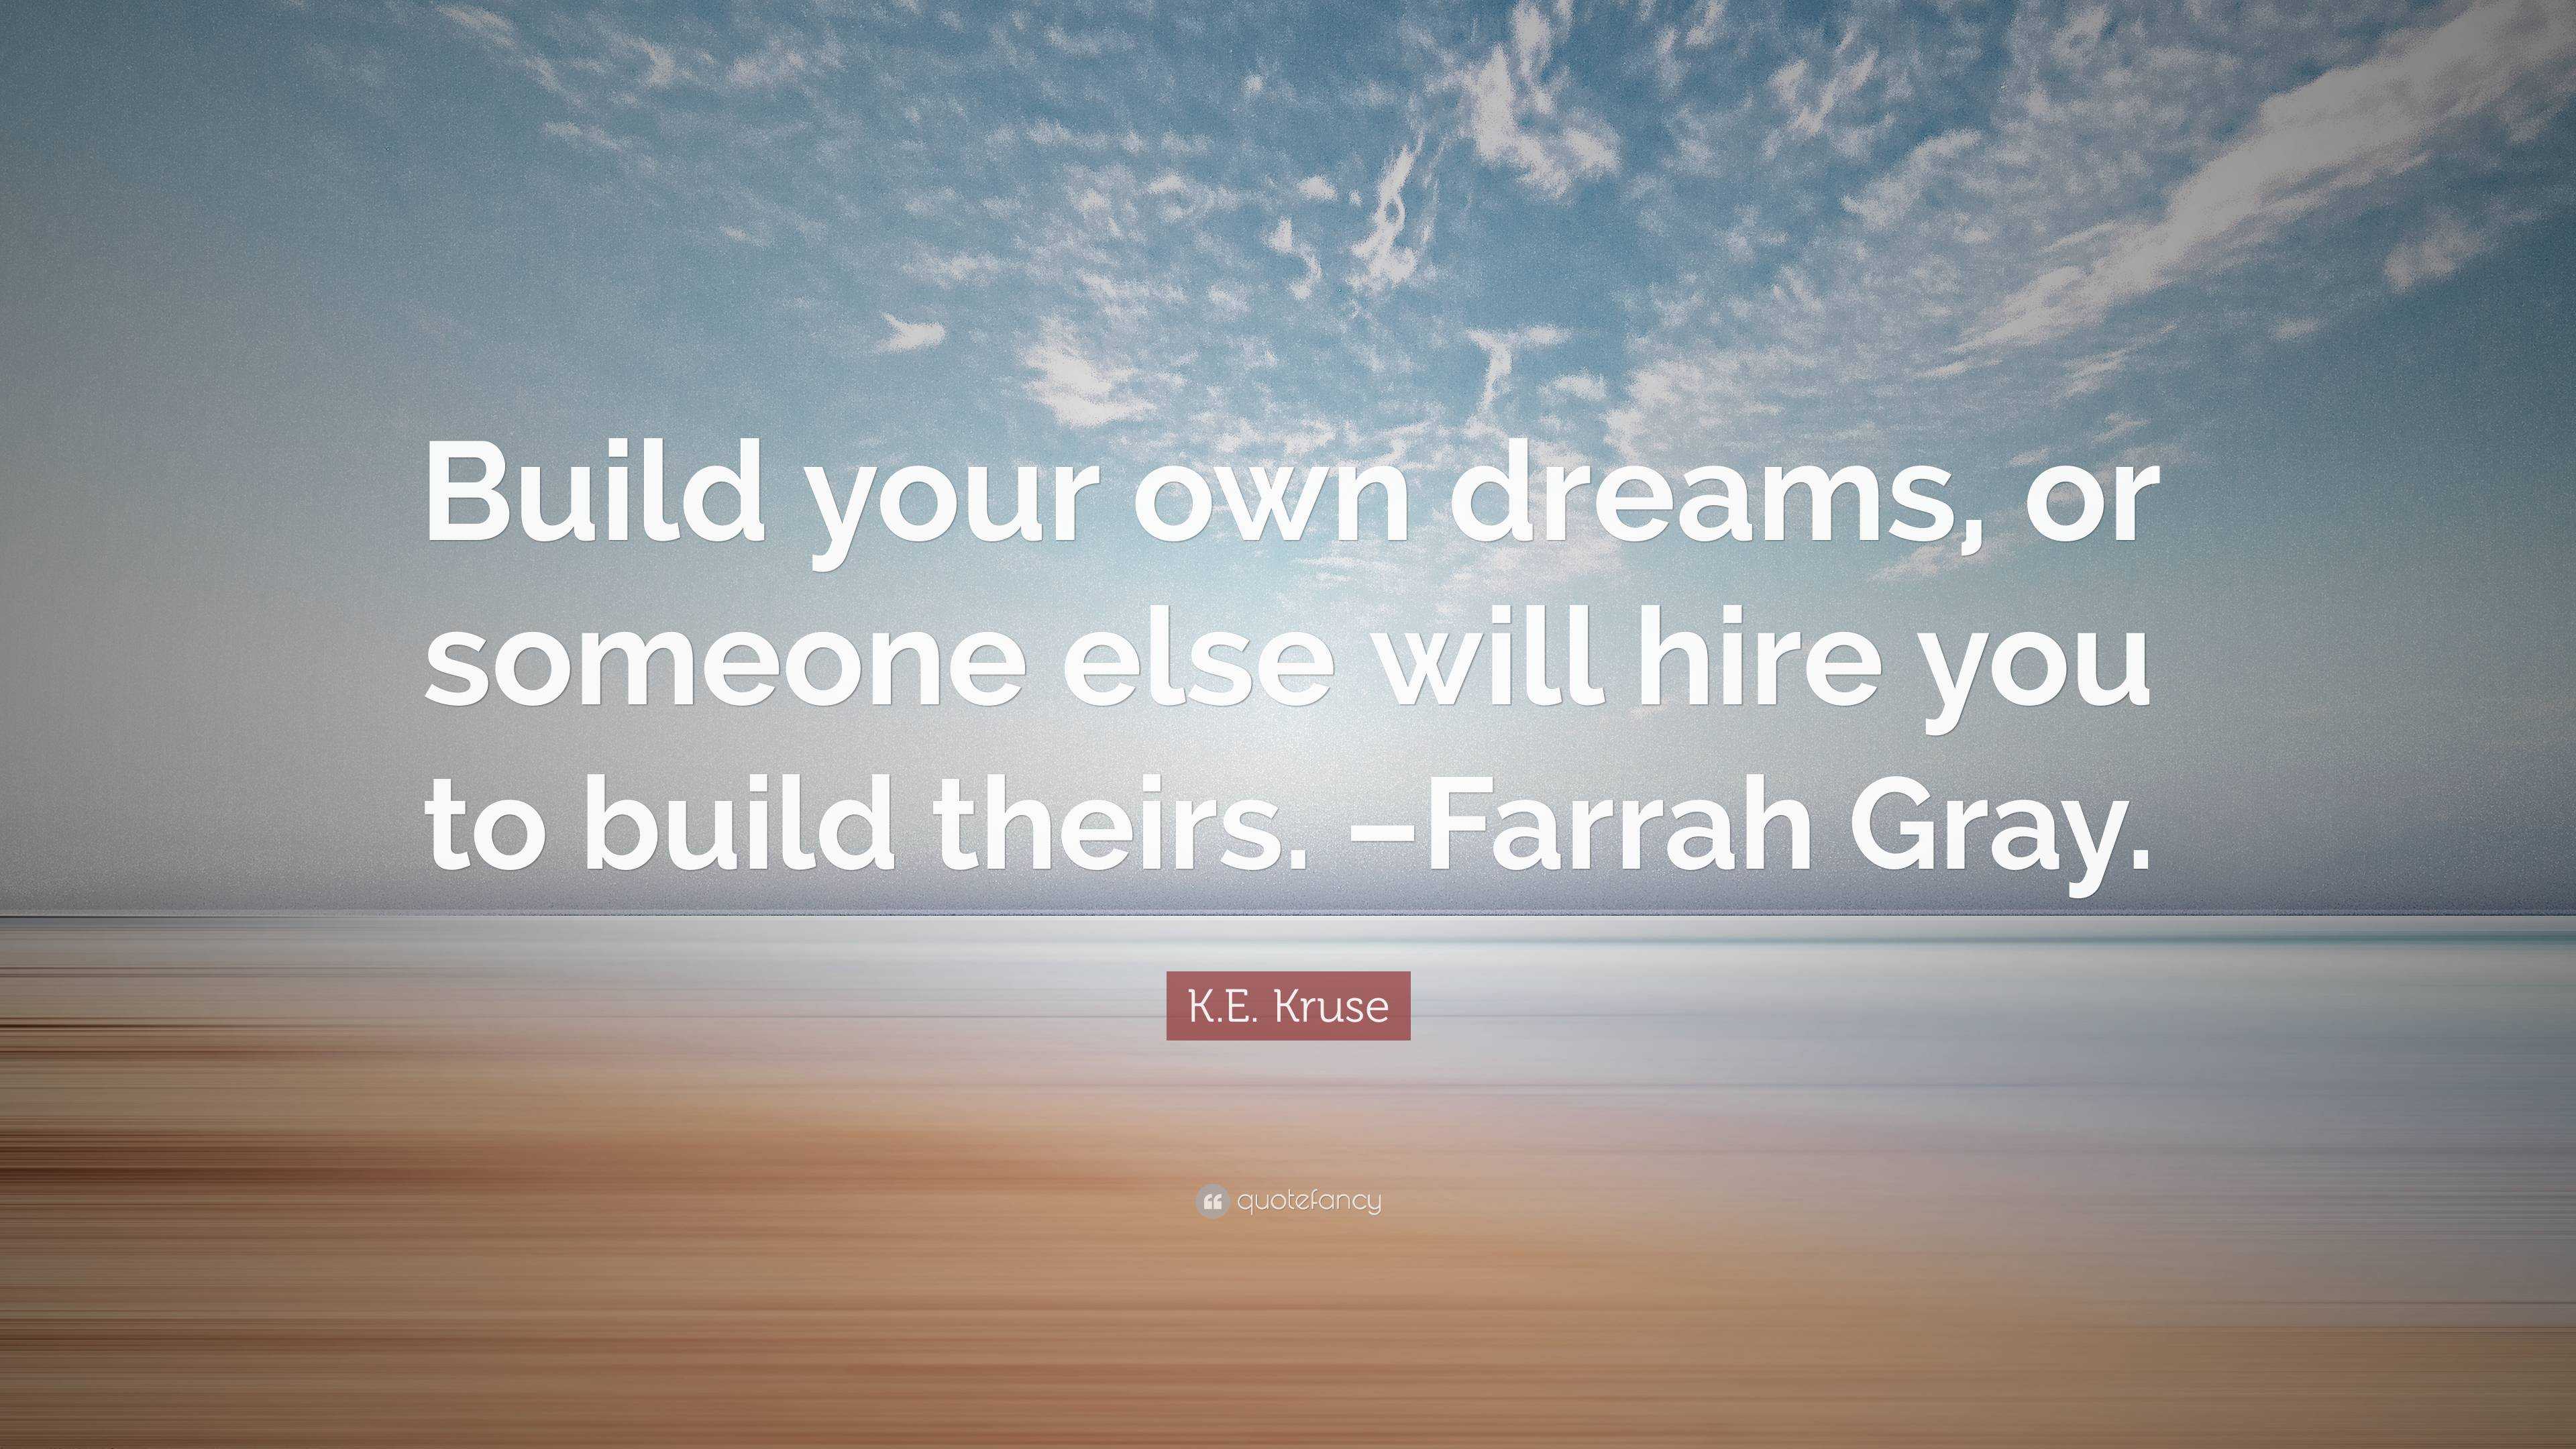 Kreate - Build your own dreams, or someone else will hire you to build  theirs. — Farrah Gray #quotes #tuesday #dreams